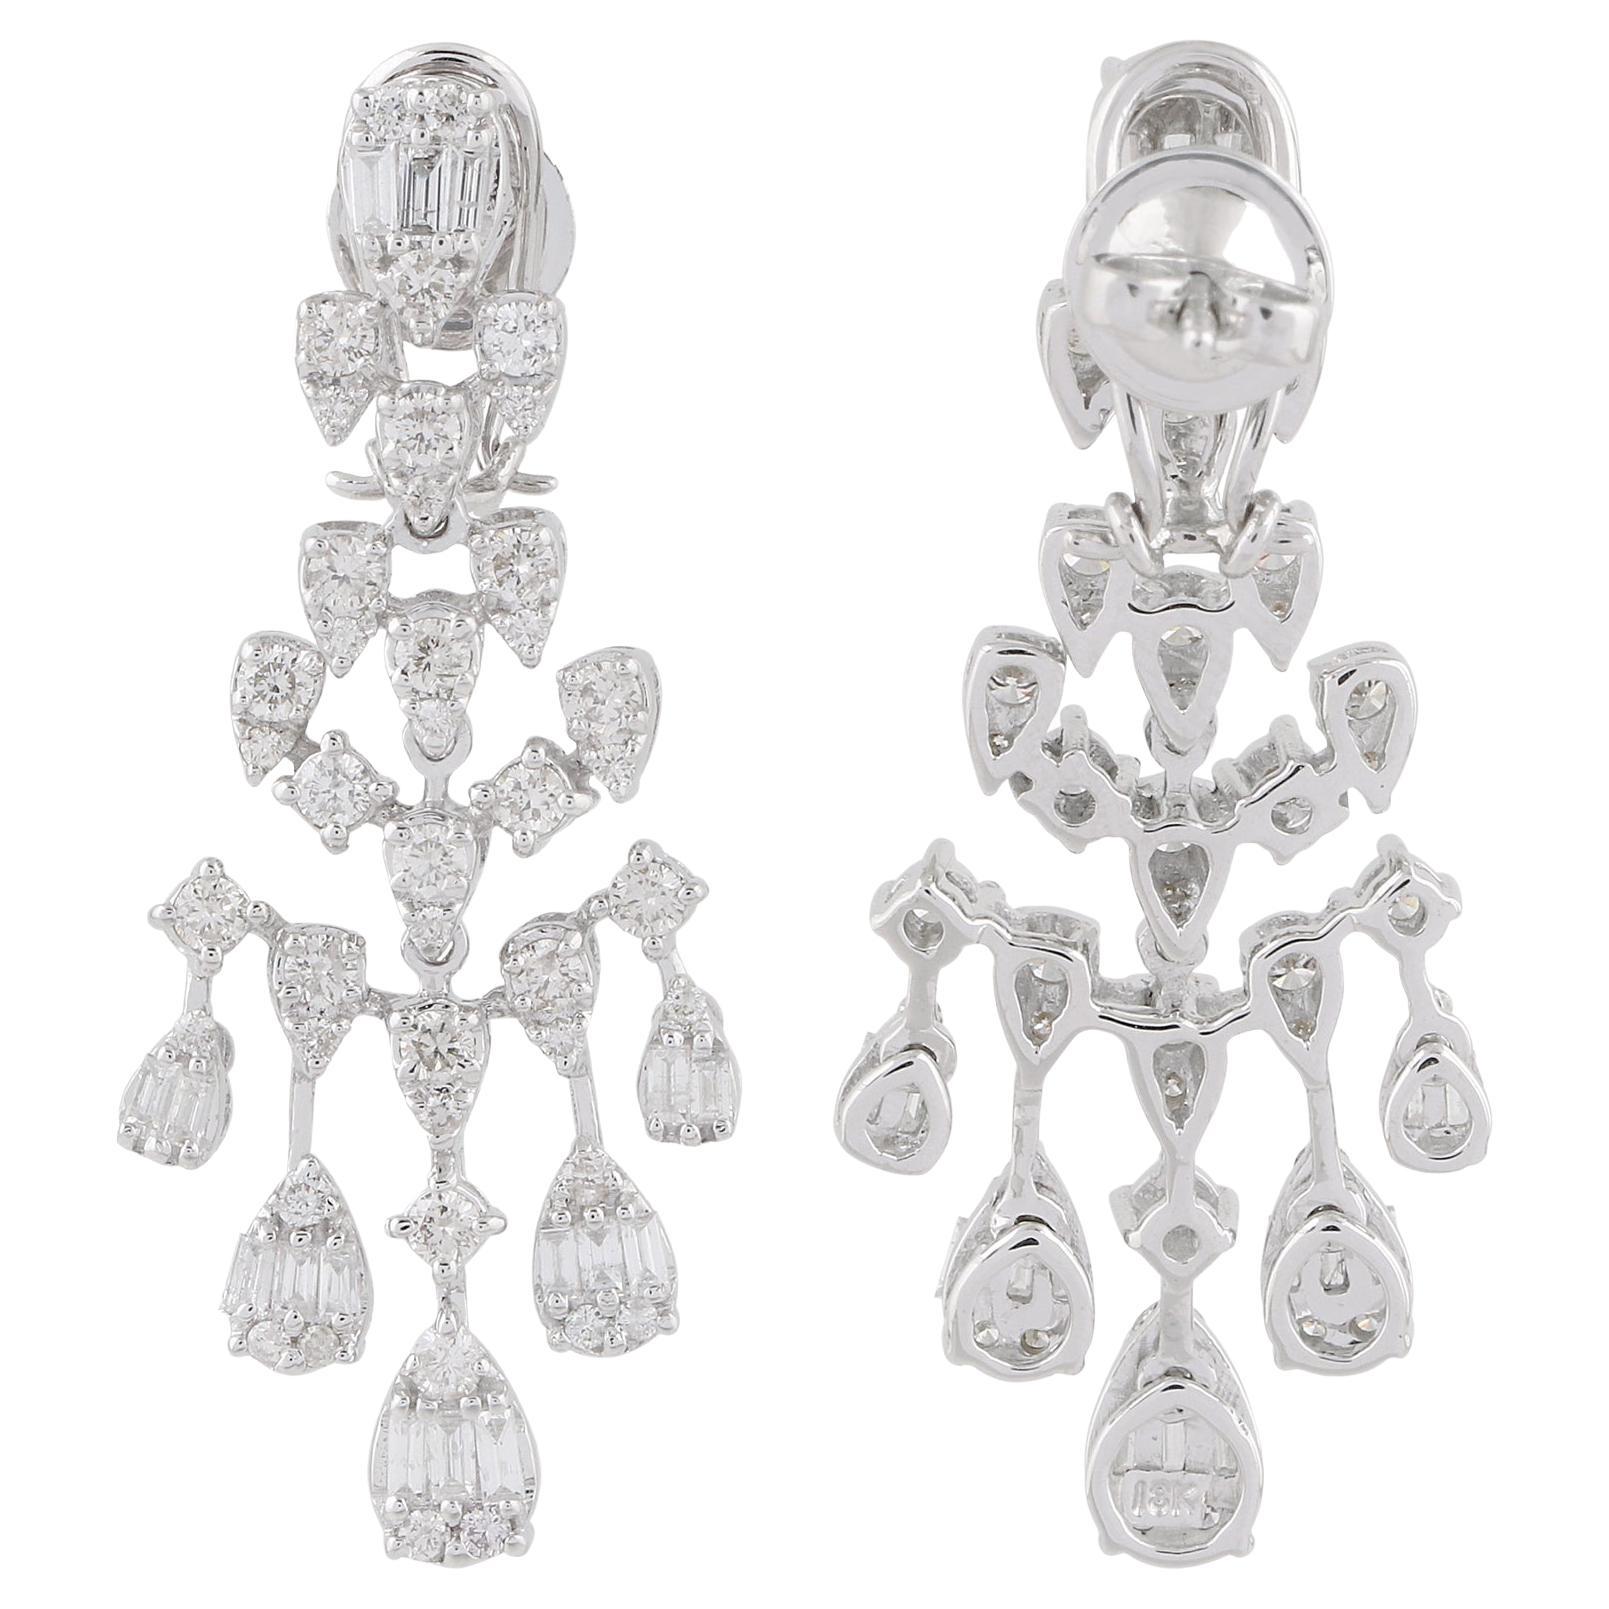 2.8 Carat SI Clarity HI Color Diamond Chandelier Earrings 14k White Gold Jewelry For Sale